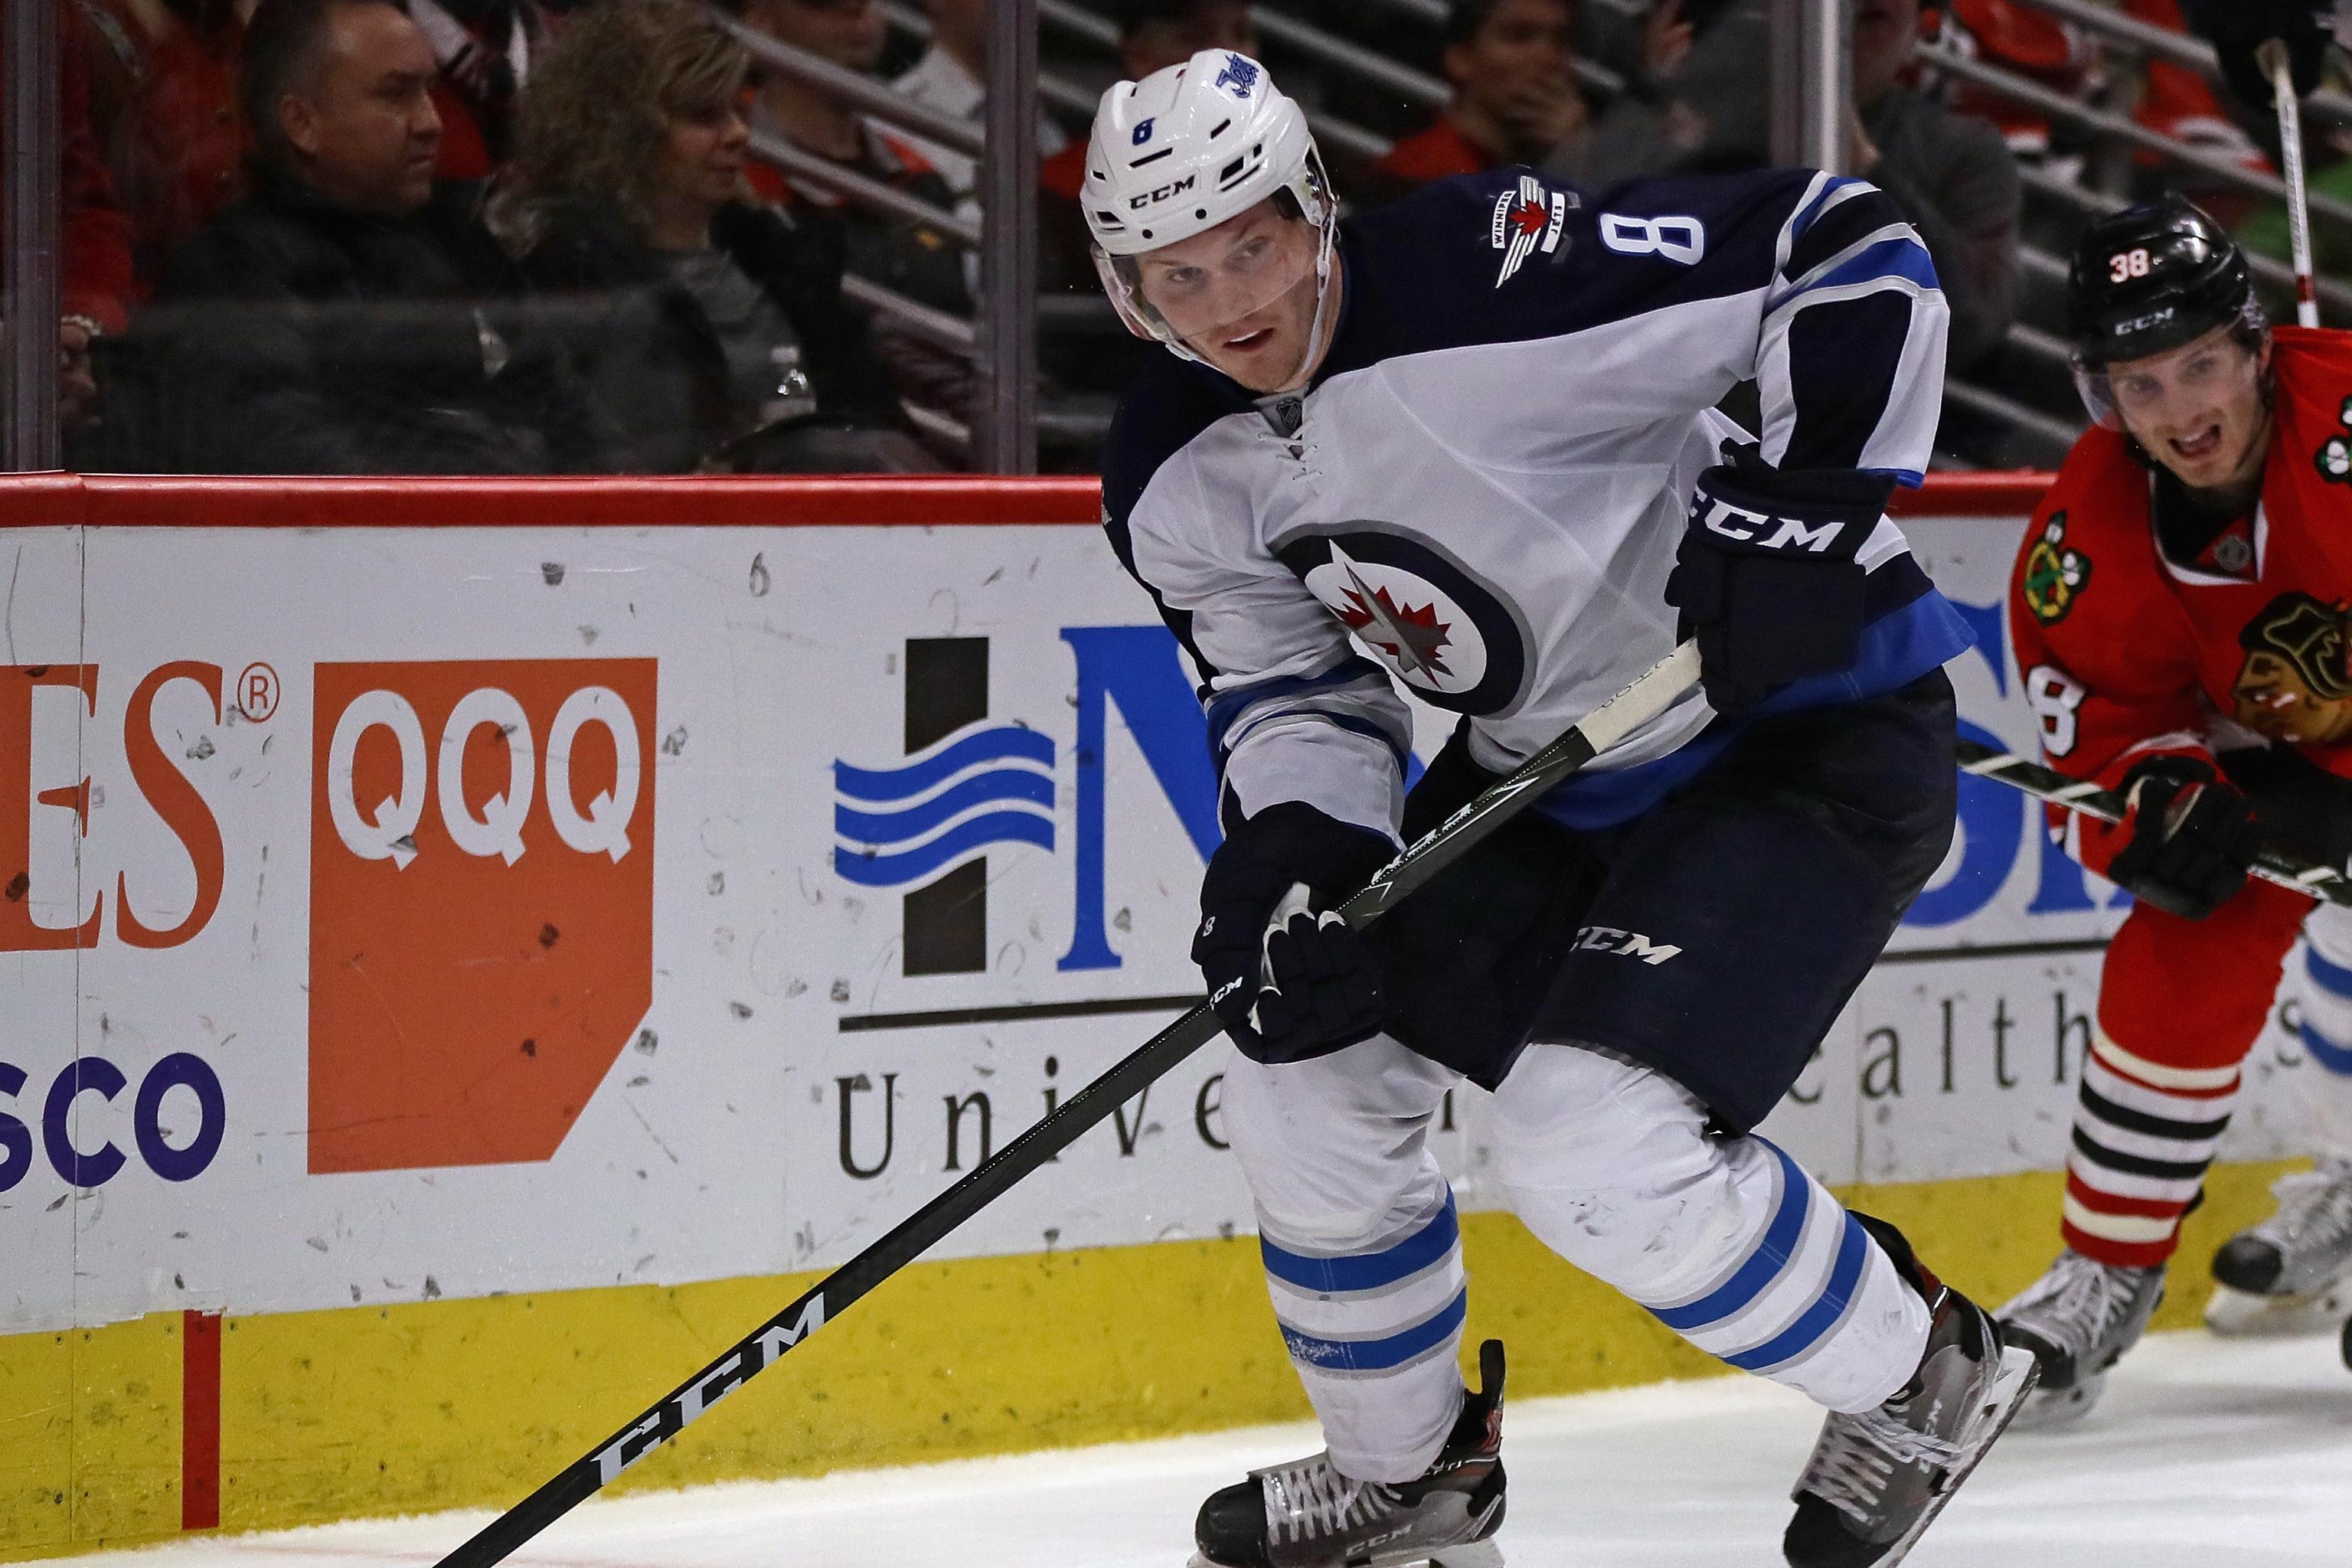 Jacob Trouba scheduled for hearing after hit on Mark Stone